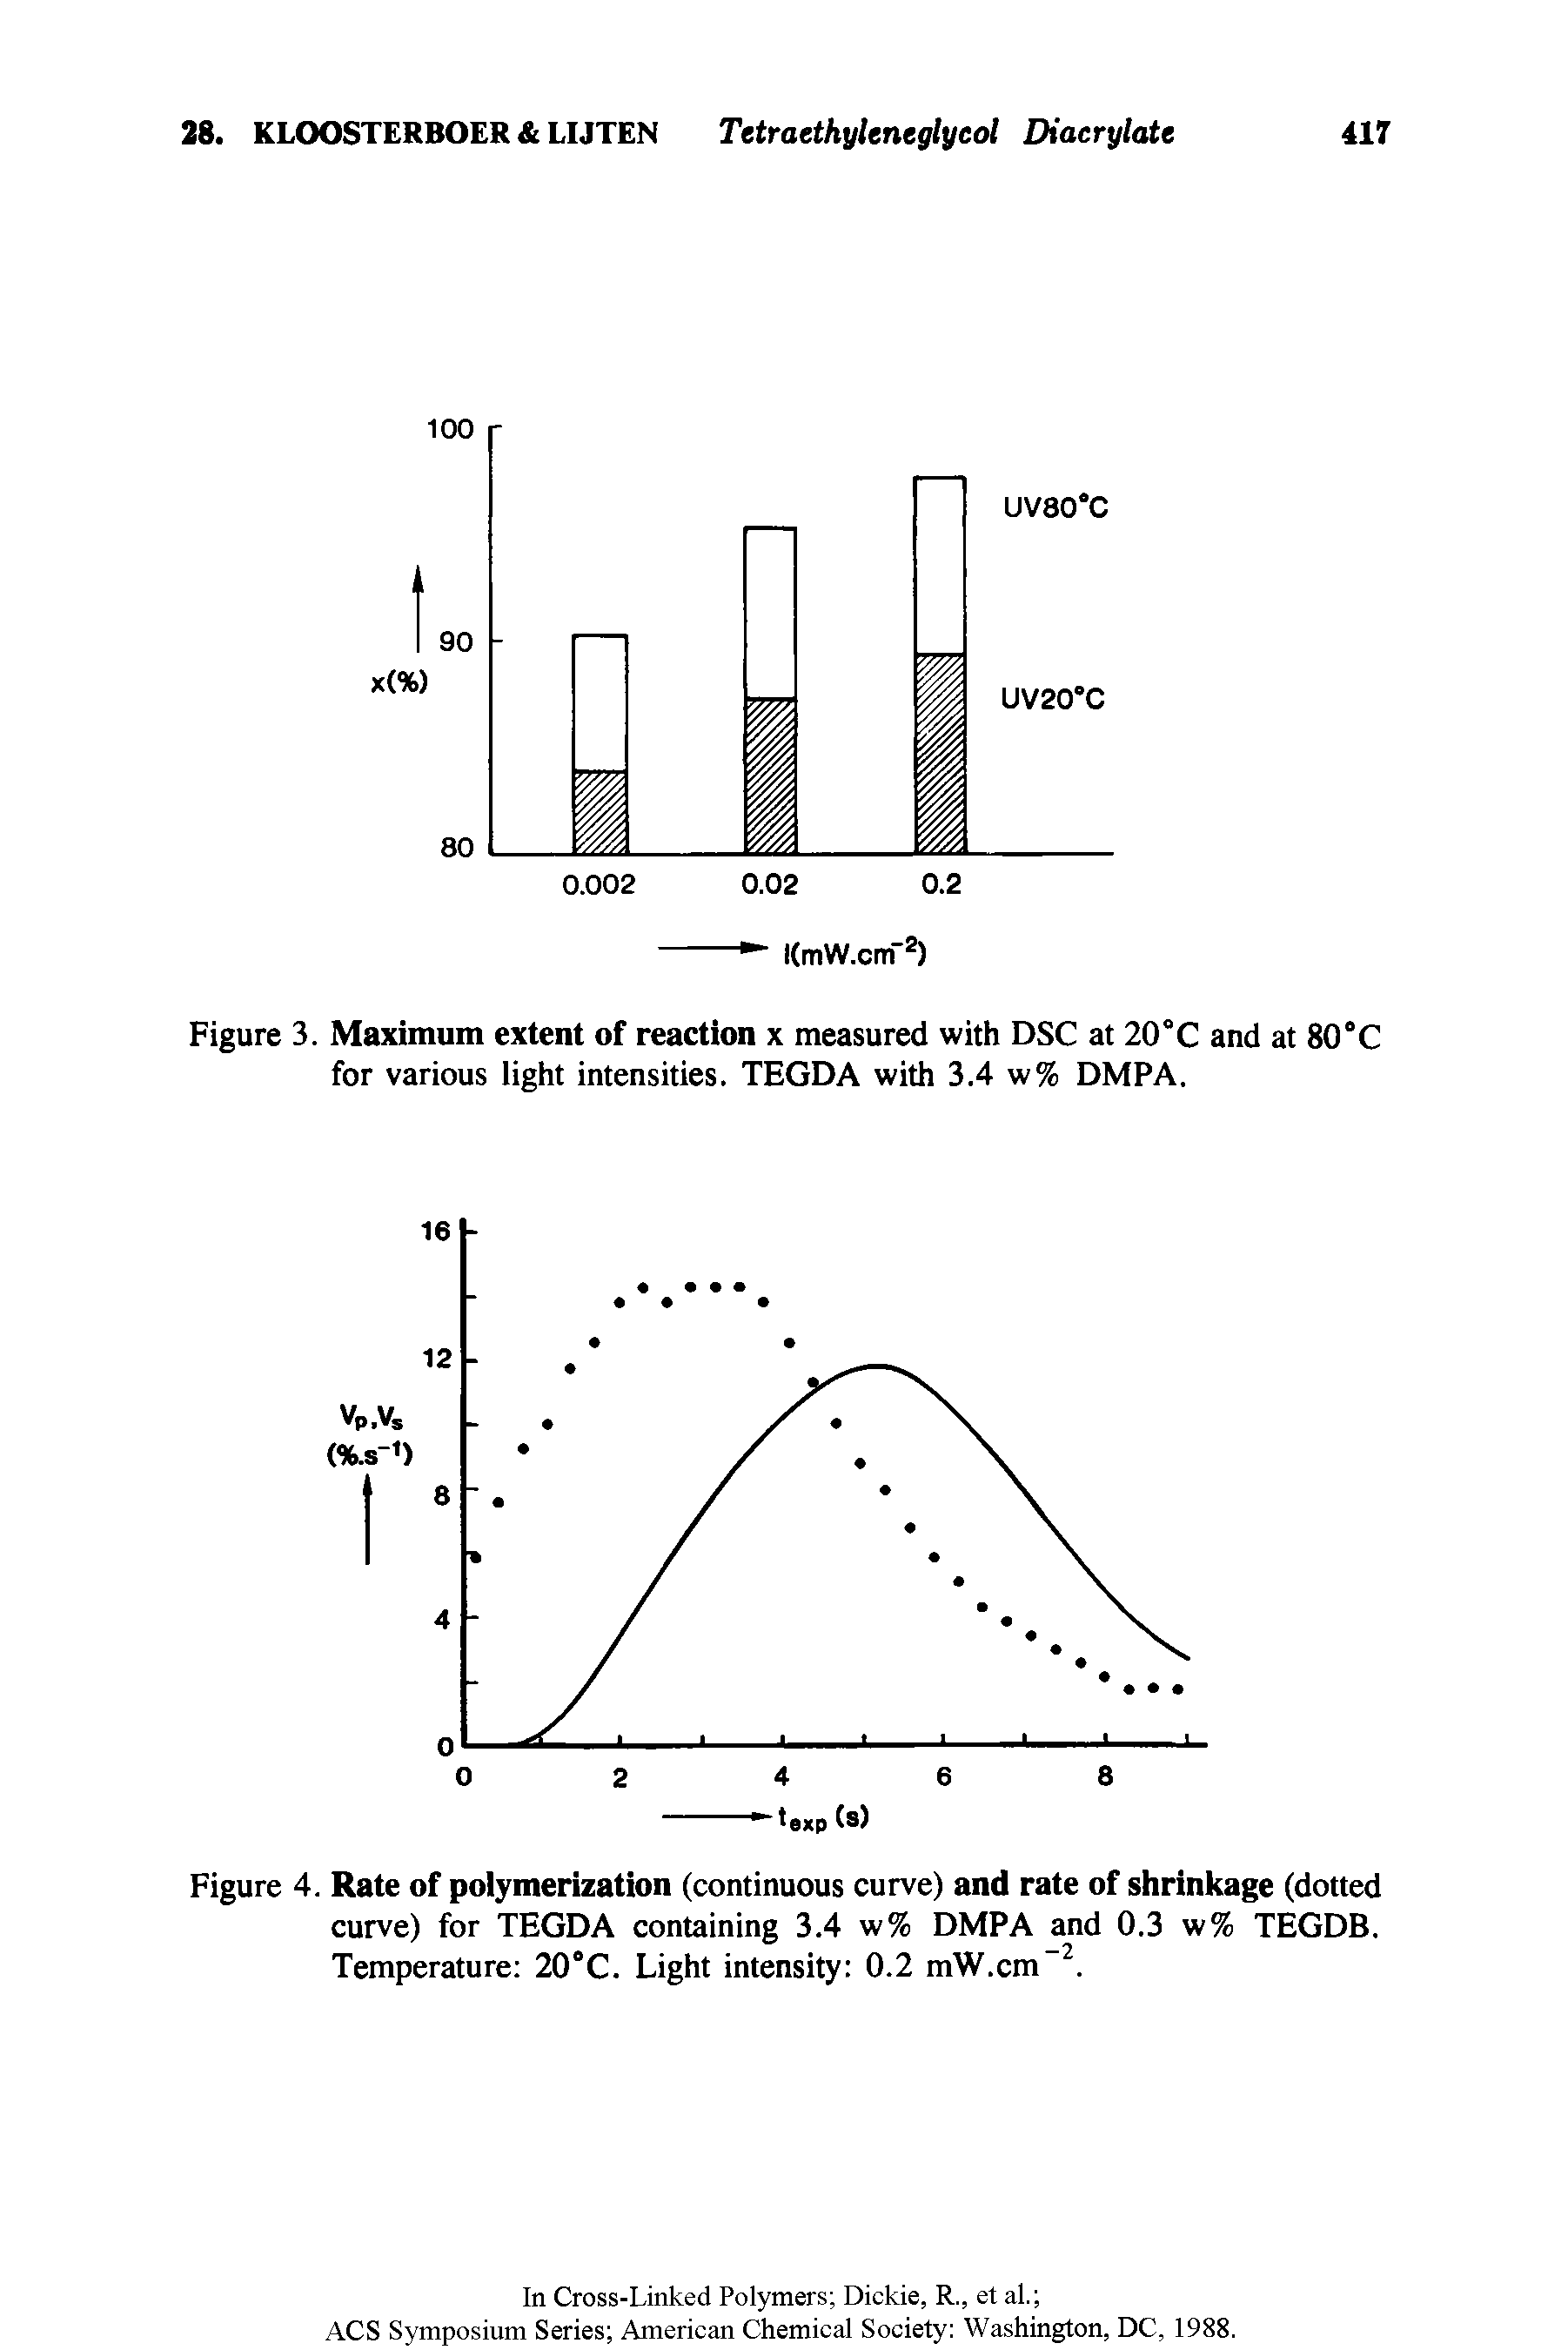 Figure 4. Rate of polymerization (continuous curve) and rate of shrinkage (dotted curve) for TEGDA containing 3.4 w% DMPA and 0.3 w% TEGDB. Temperature 20°C. Light intensity 0.2 mW.cm . ...